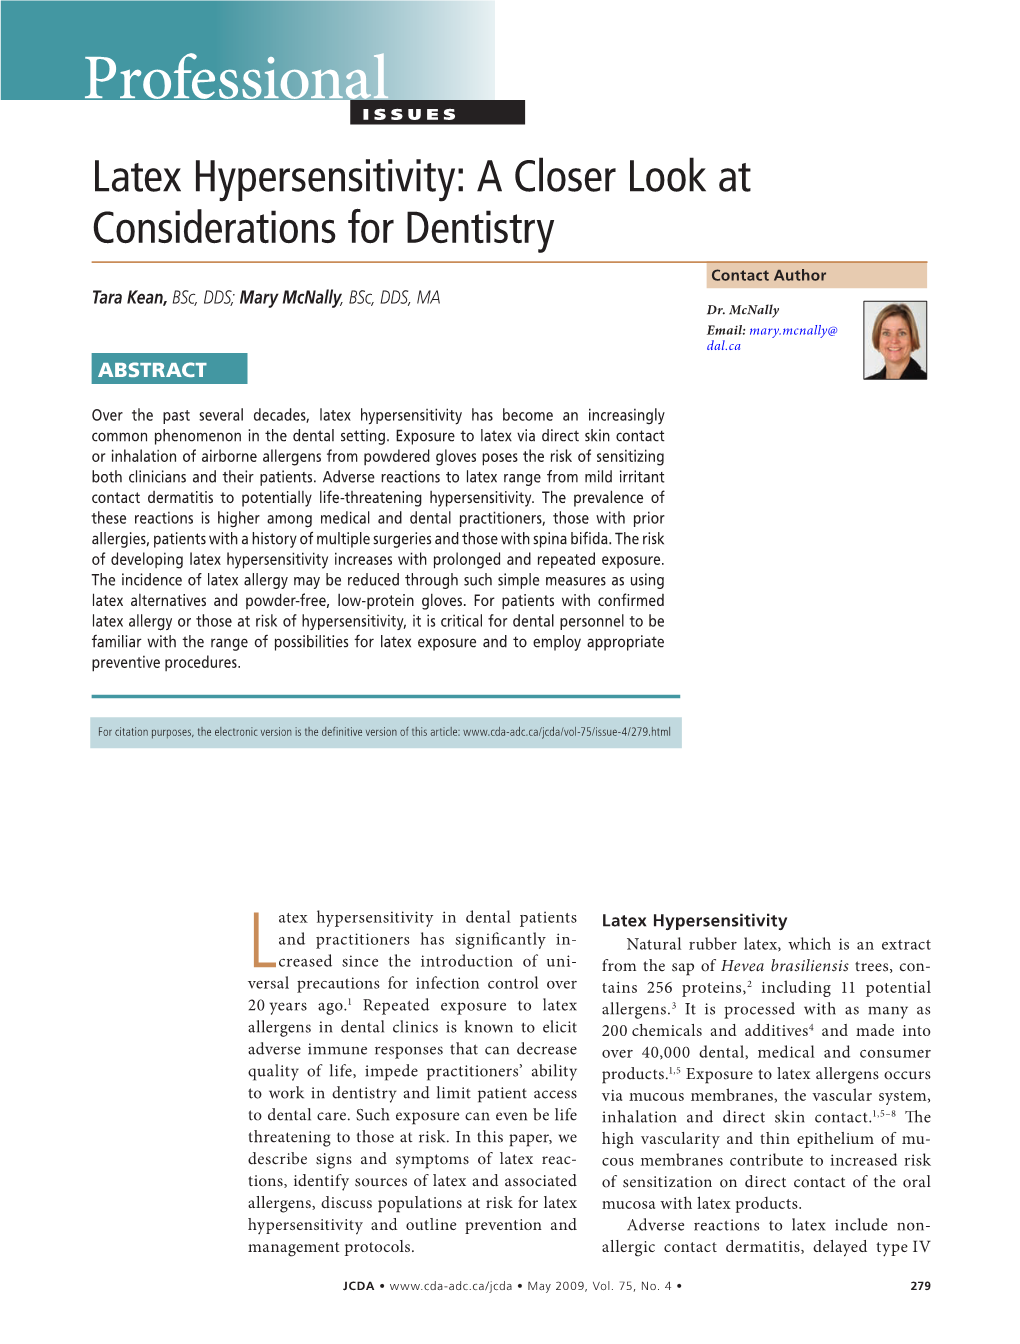 Latex Hypersensitivity: a Closer Look at Considerations for Dentistry Contact Author Tara Kean, Bsc, DDS; Mary Mcnally, Bsc, DDS, MA Dr